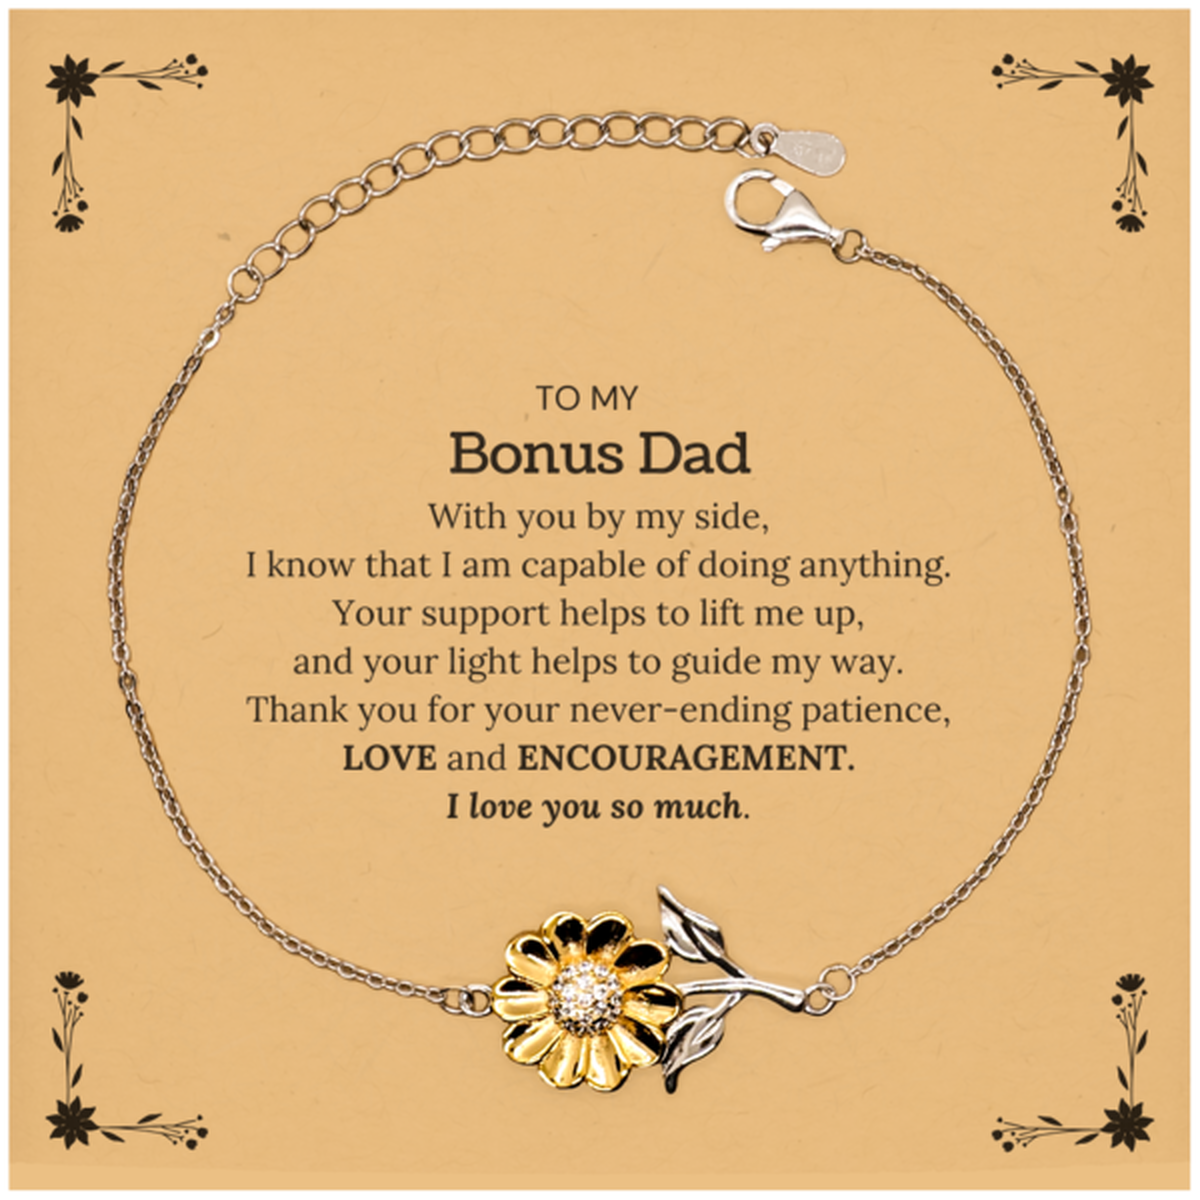 Appreciation Bonus Dad Sunflower Bracelet Gifts, To My Bonus Dad Birthday Christmas Wedding Keepsake Gifts for Bonus Dad With you by my side, I know that I am capable of doing anything. I love you so much